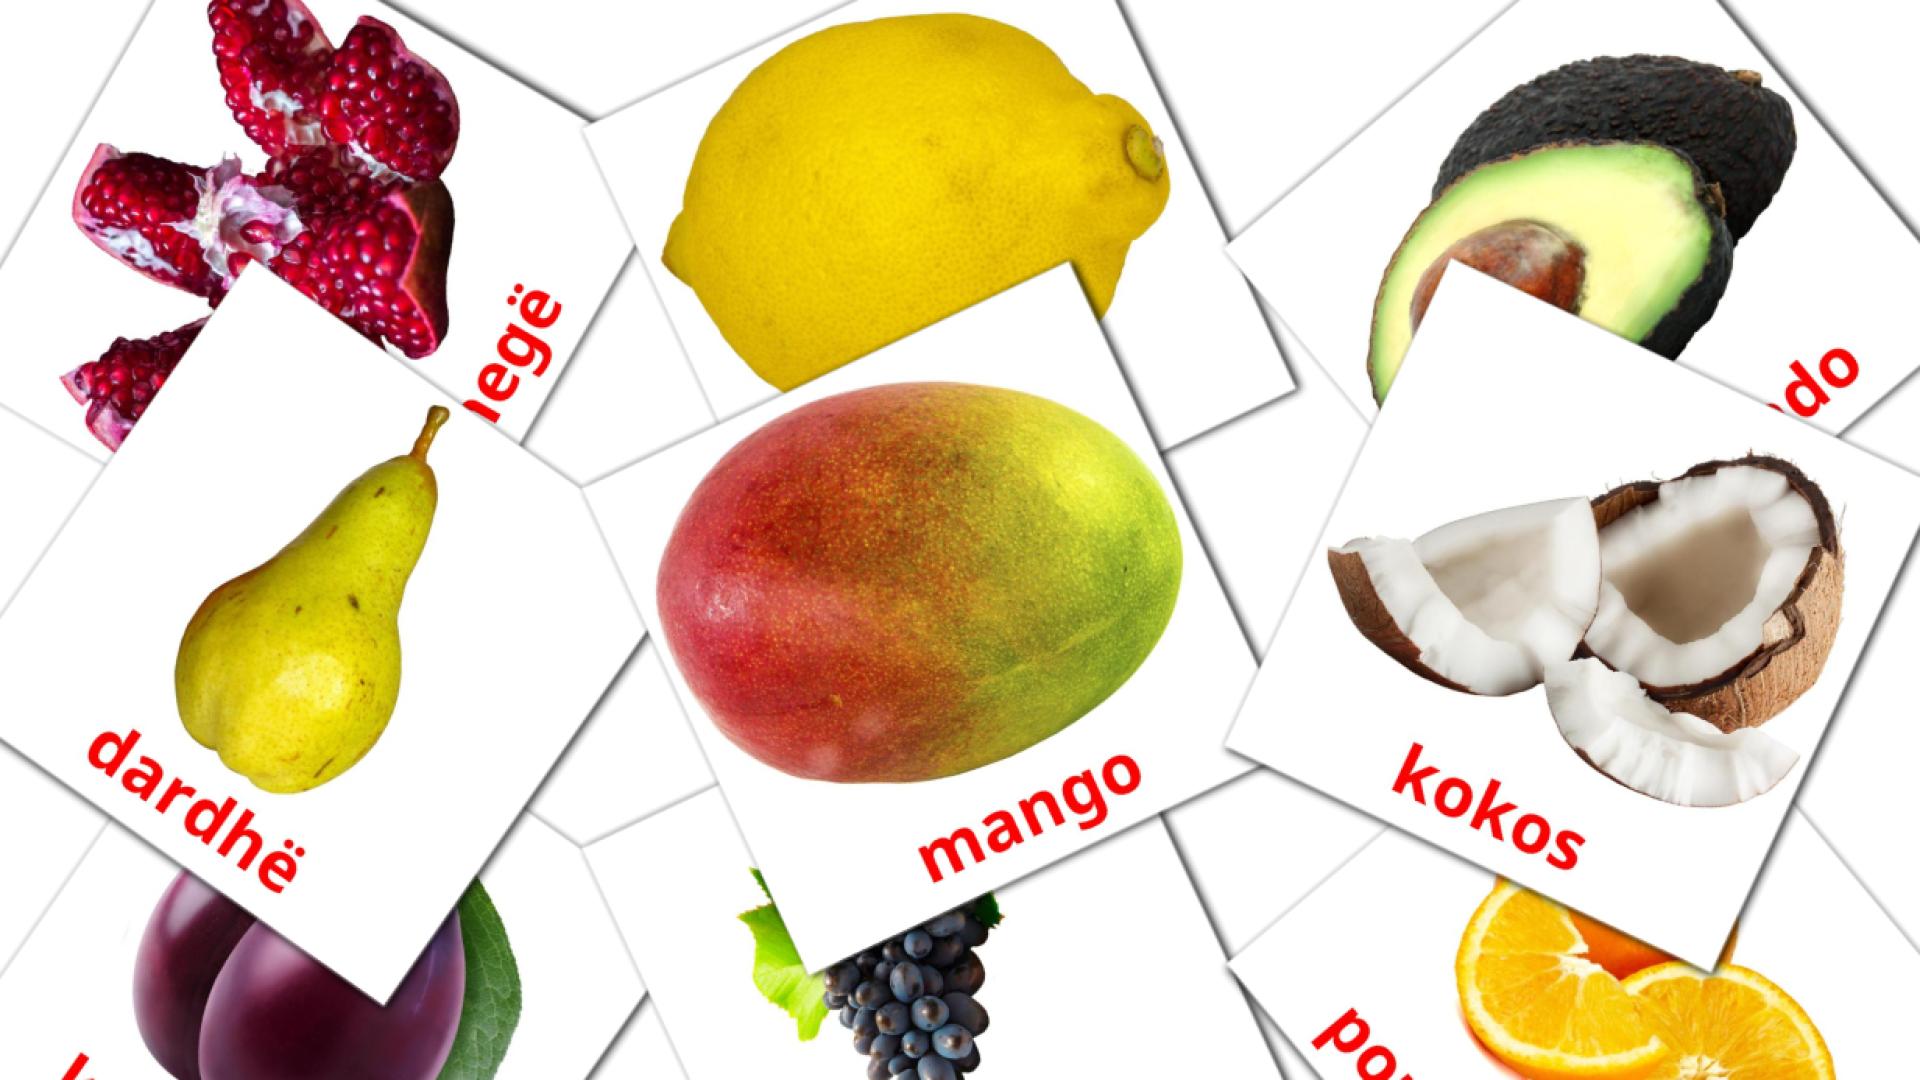 flashcards Les Fruits